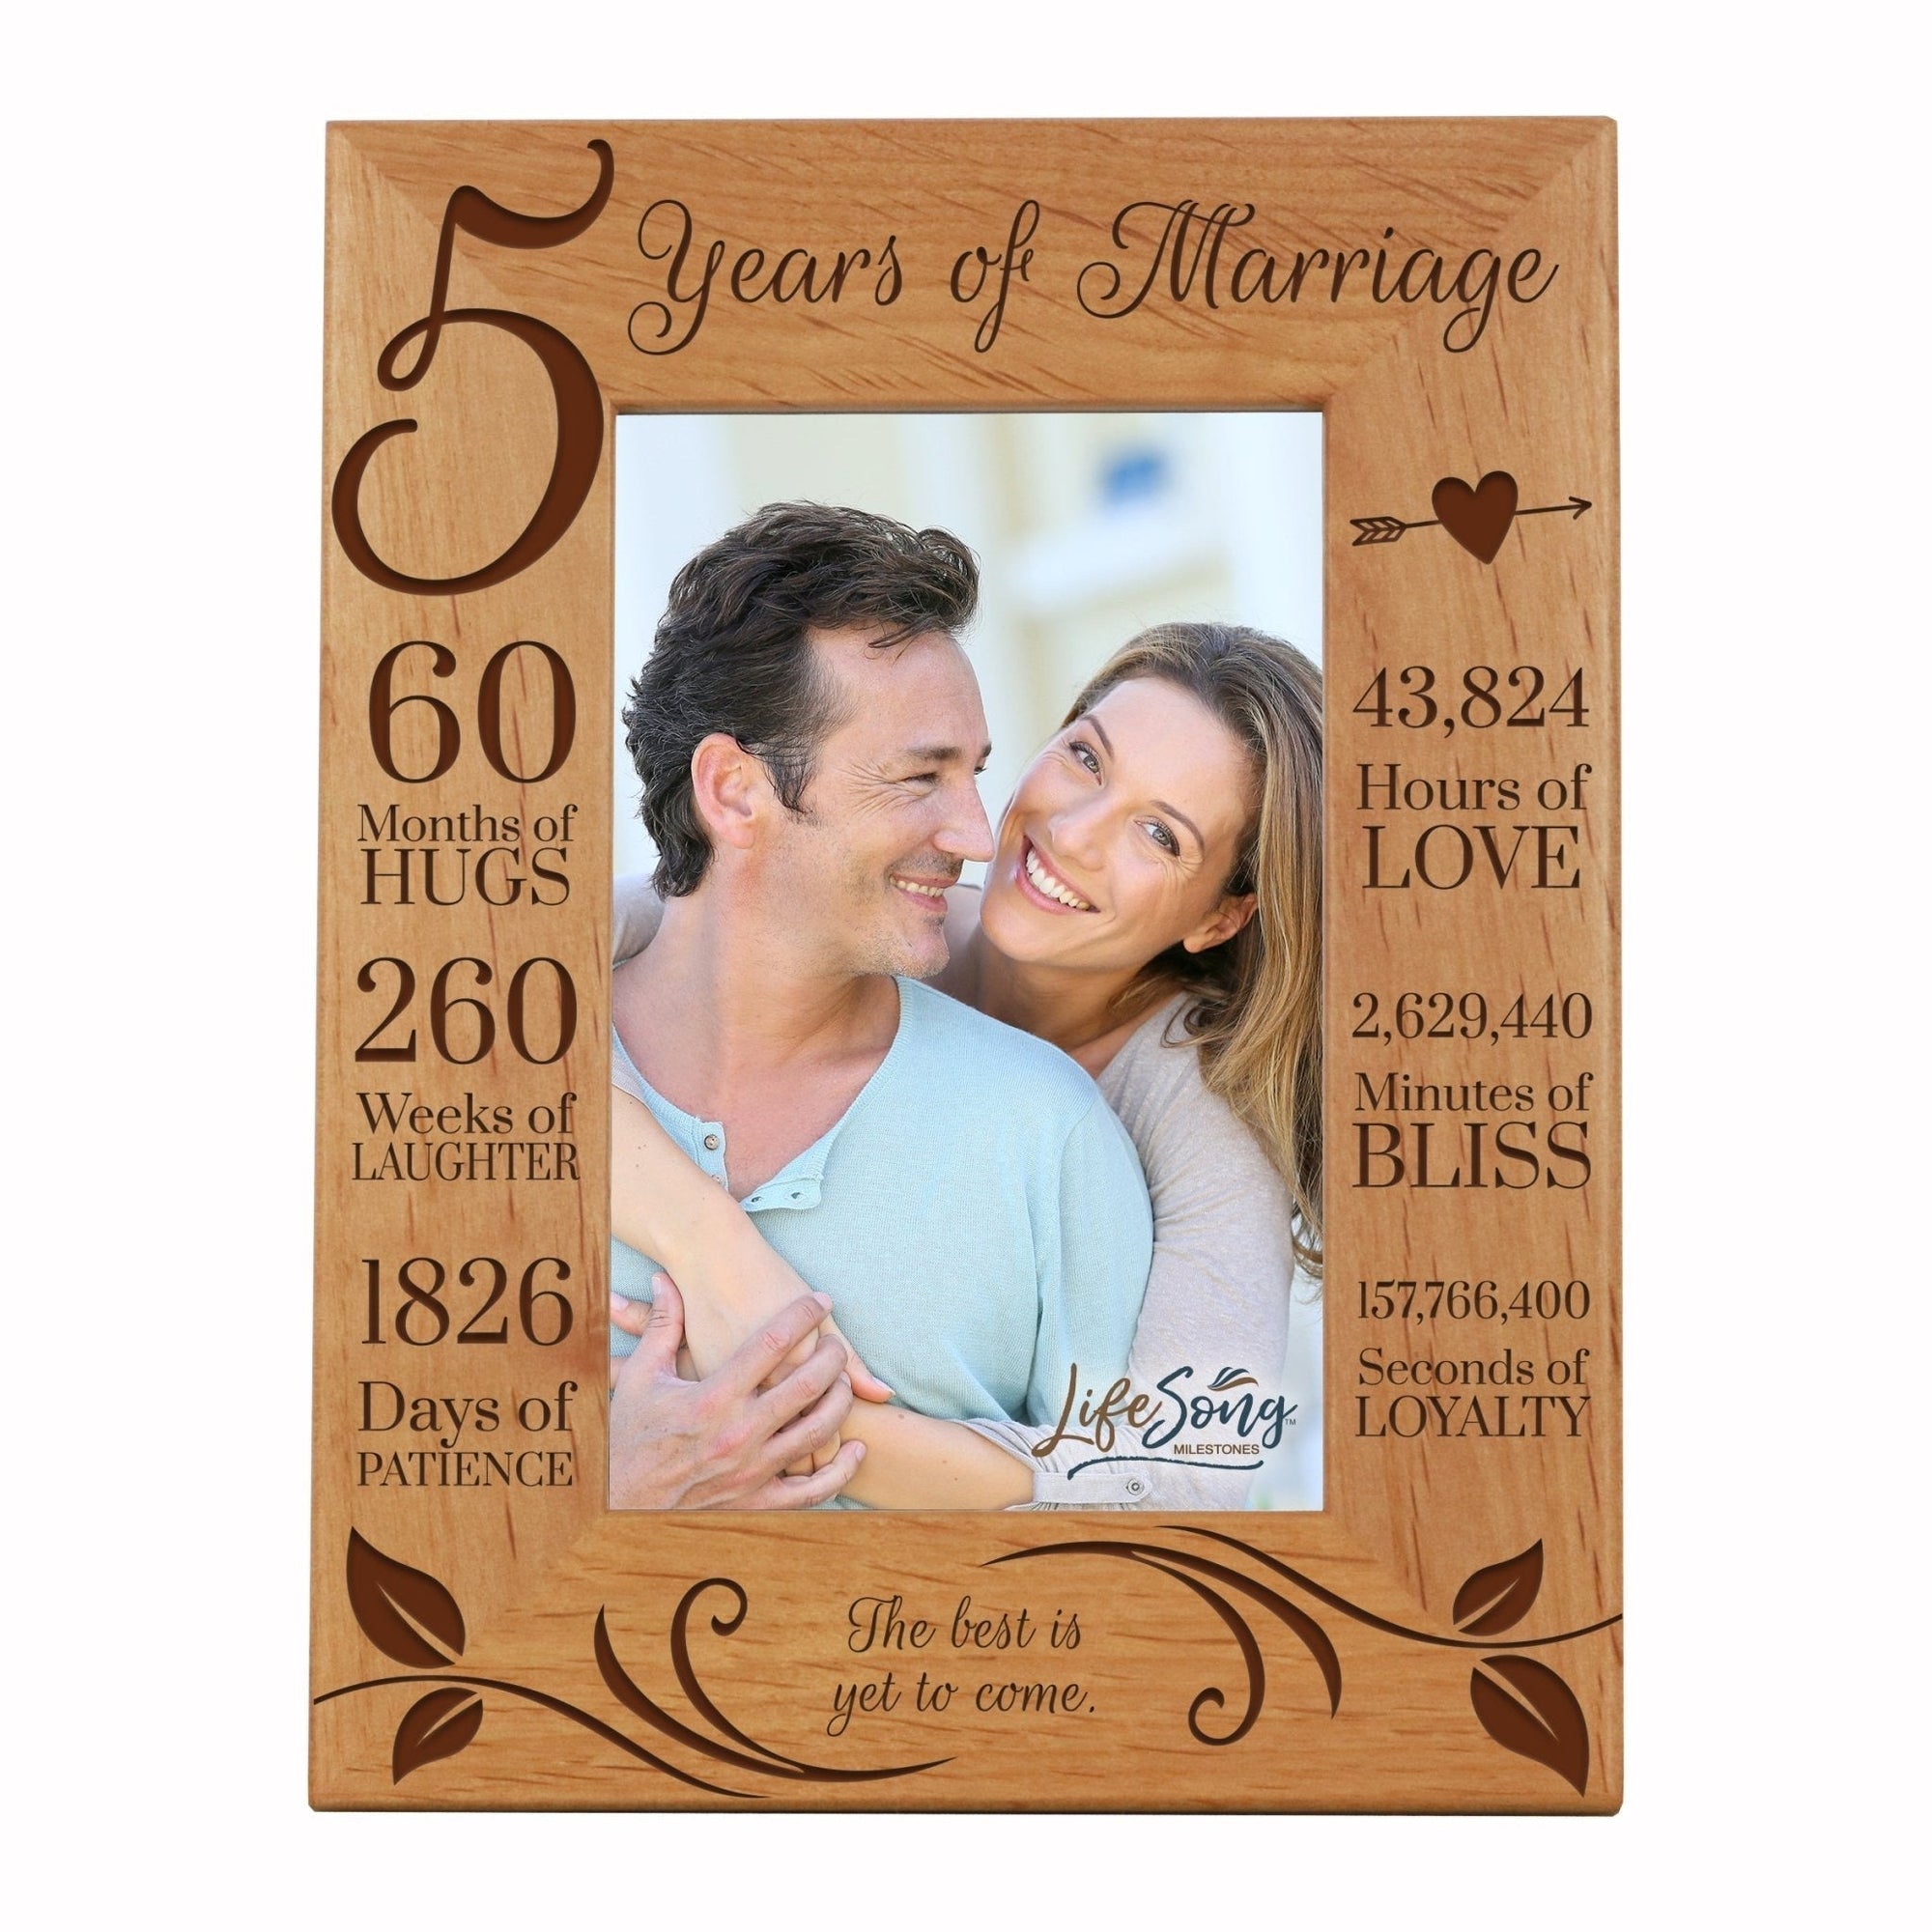 Engraved 5th Wedding Anniversary Photo Frame Wall Decor Gift for Couples - The Best Is Yet To Come - LifeSong Milestones